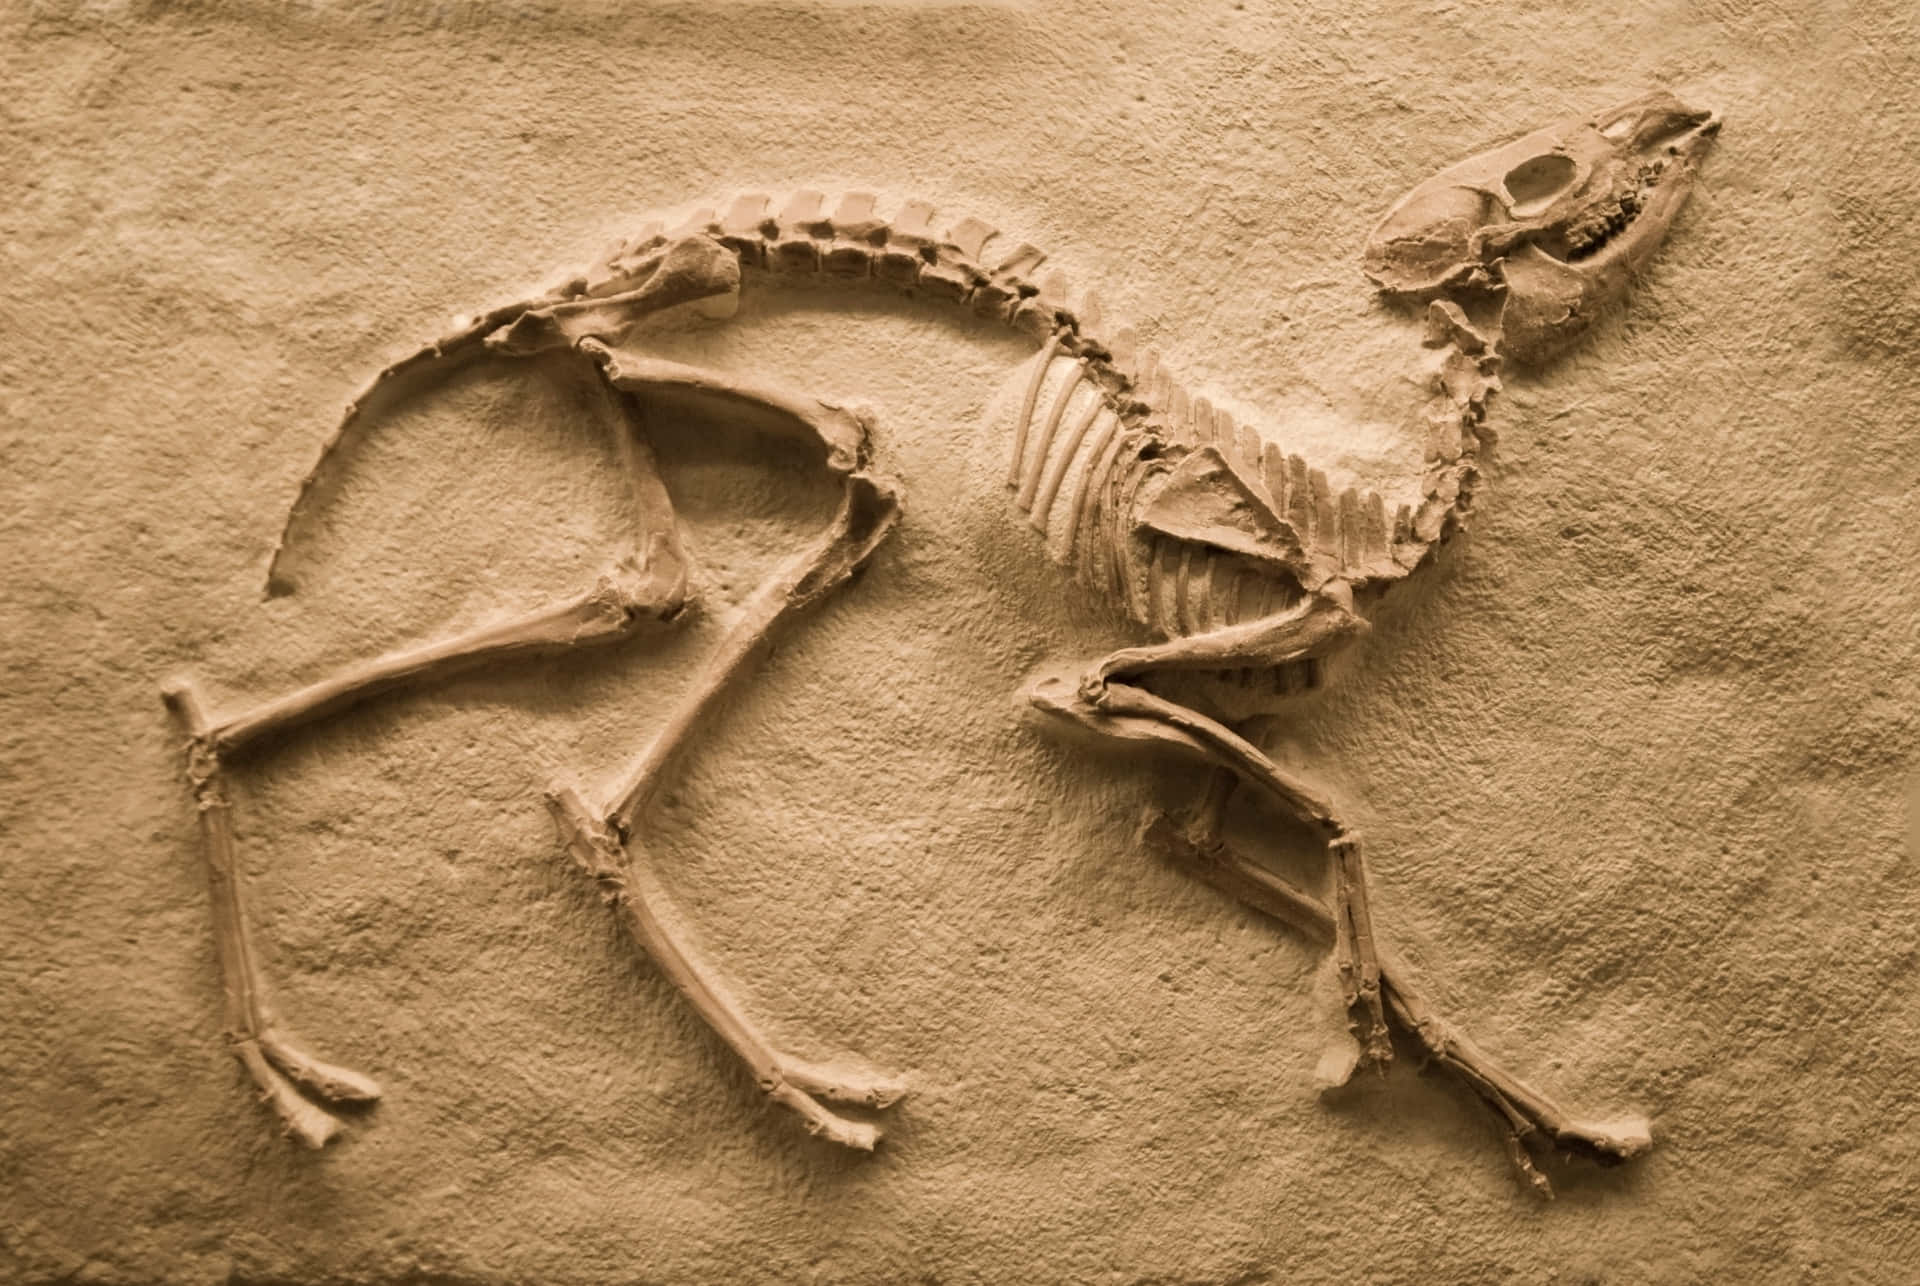 A Skeleton Of A Dog Is Shown On A Wall